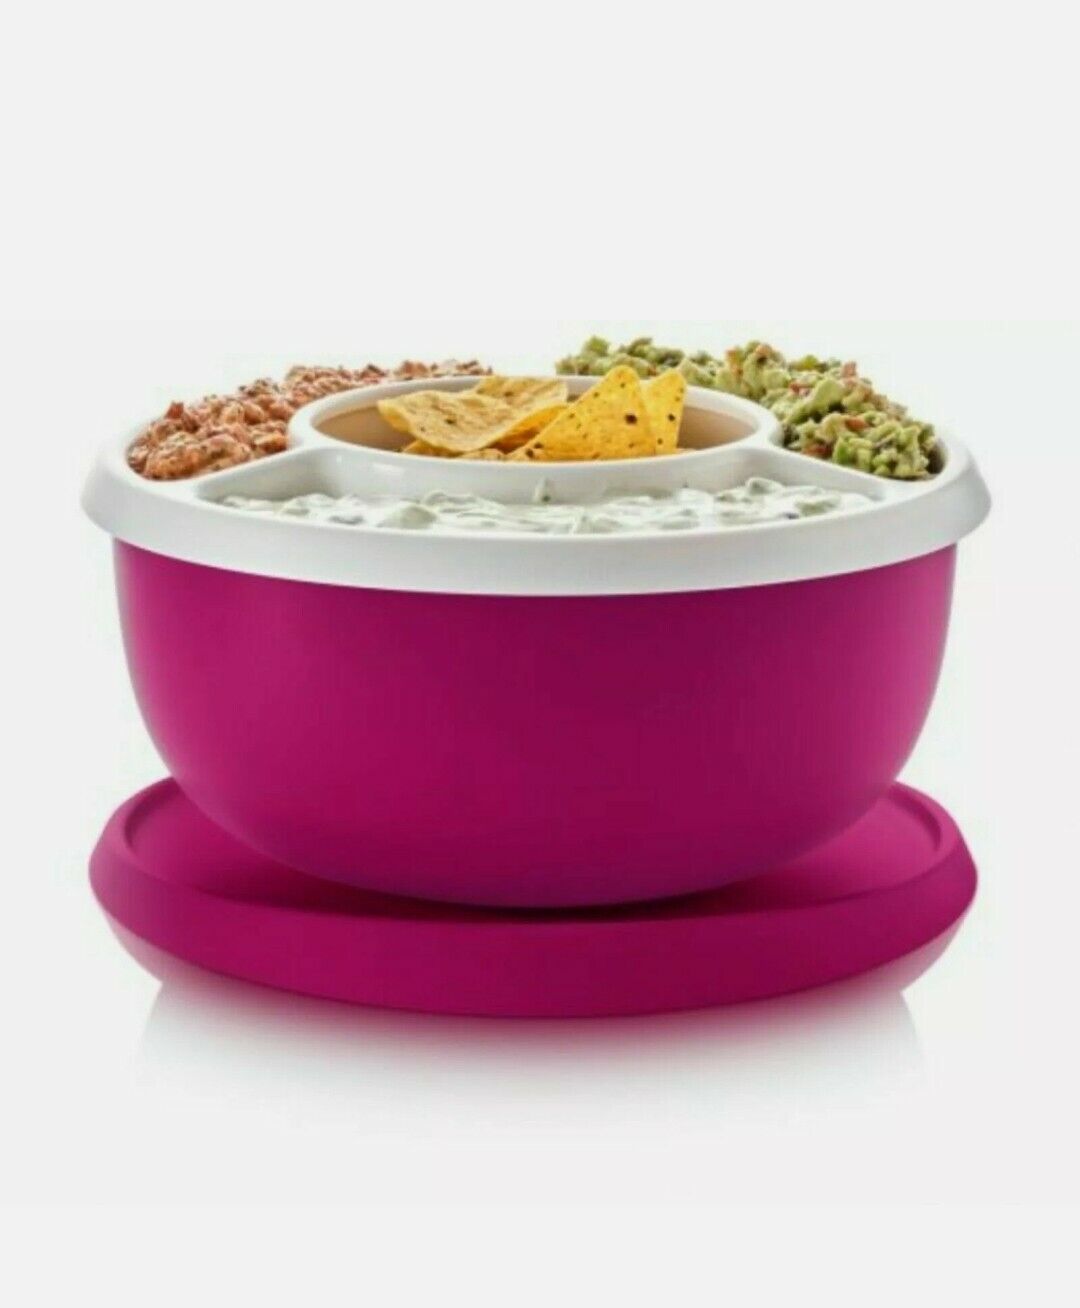 TUPPERWARE ESSENTIALS PINK LARGE BOWL SEAL  PARTY TRAY 18 CUPS COZY BRUNCH NEW